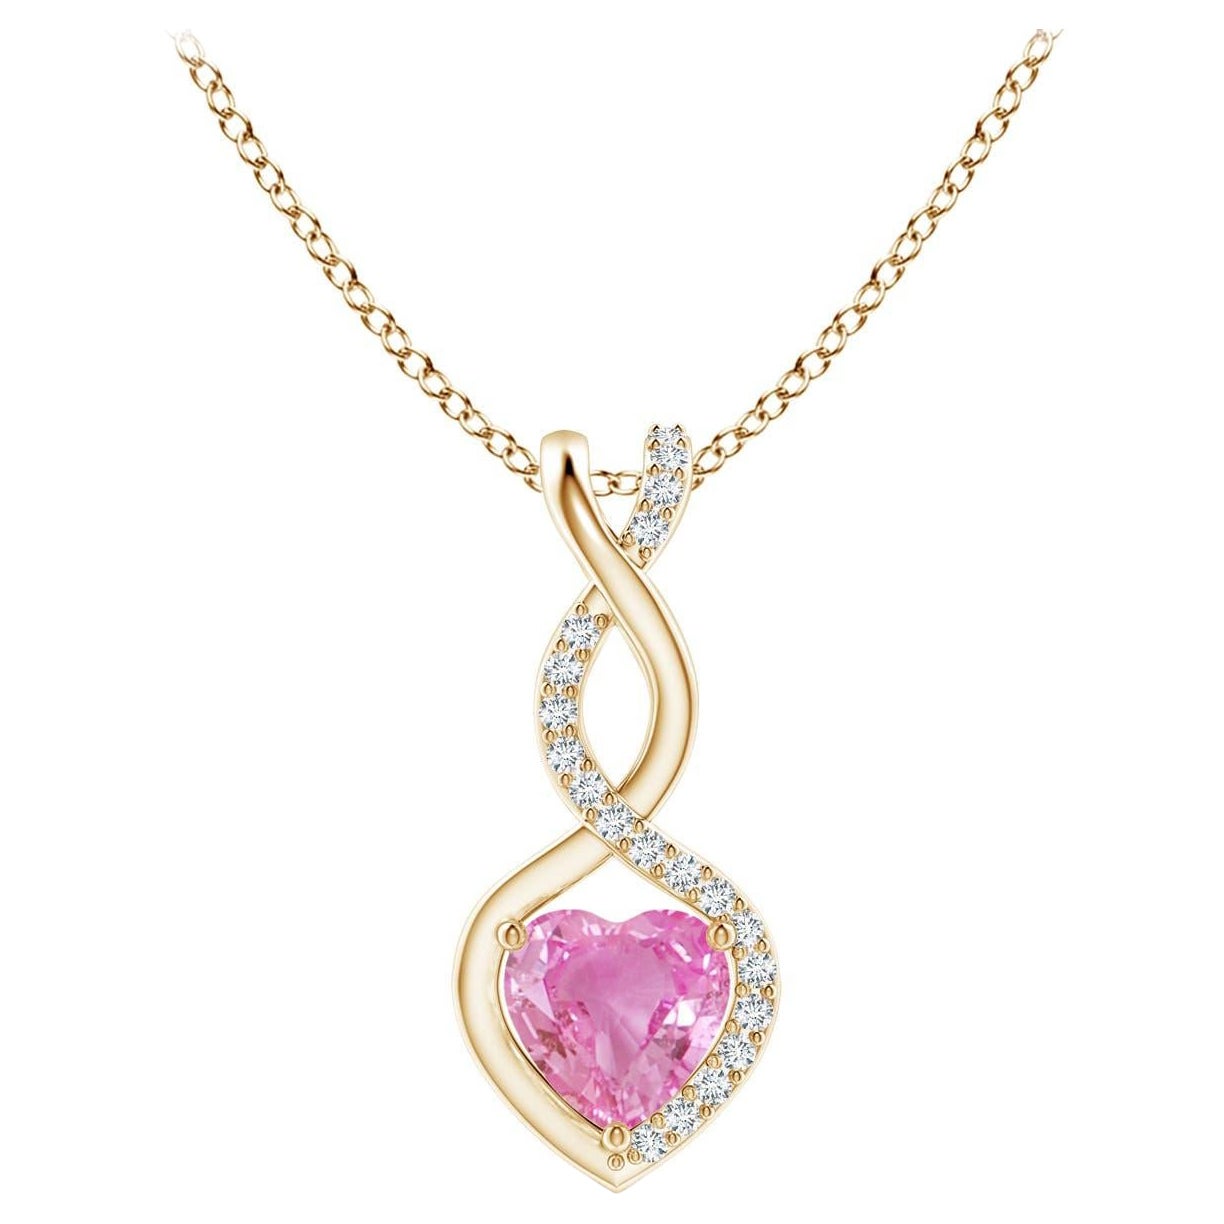 Natural 0.55ct Pink Sapphire Infinity Heart Pendant Diamonds in 14K Yellow Gold